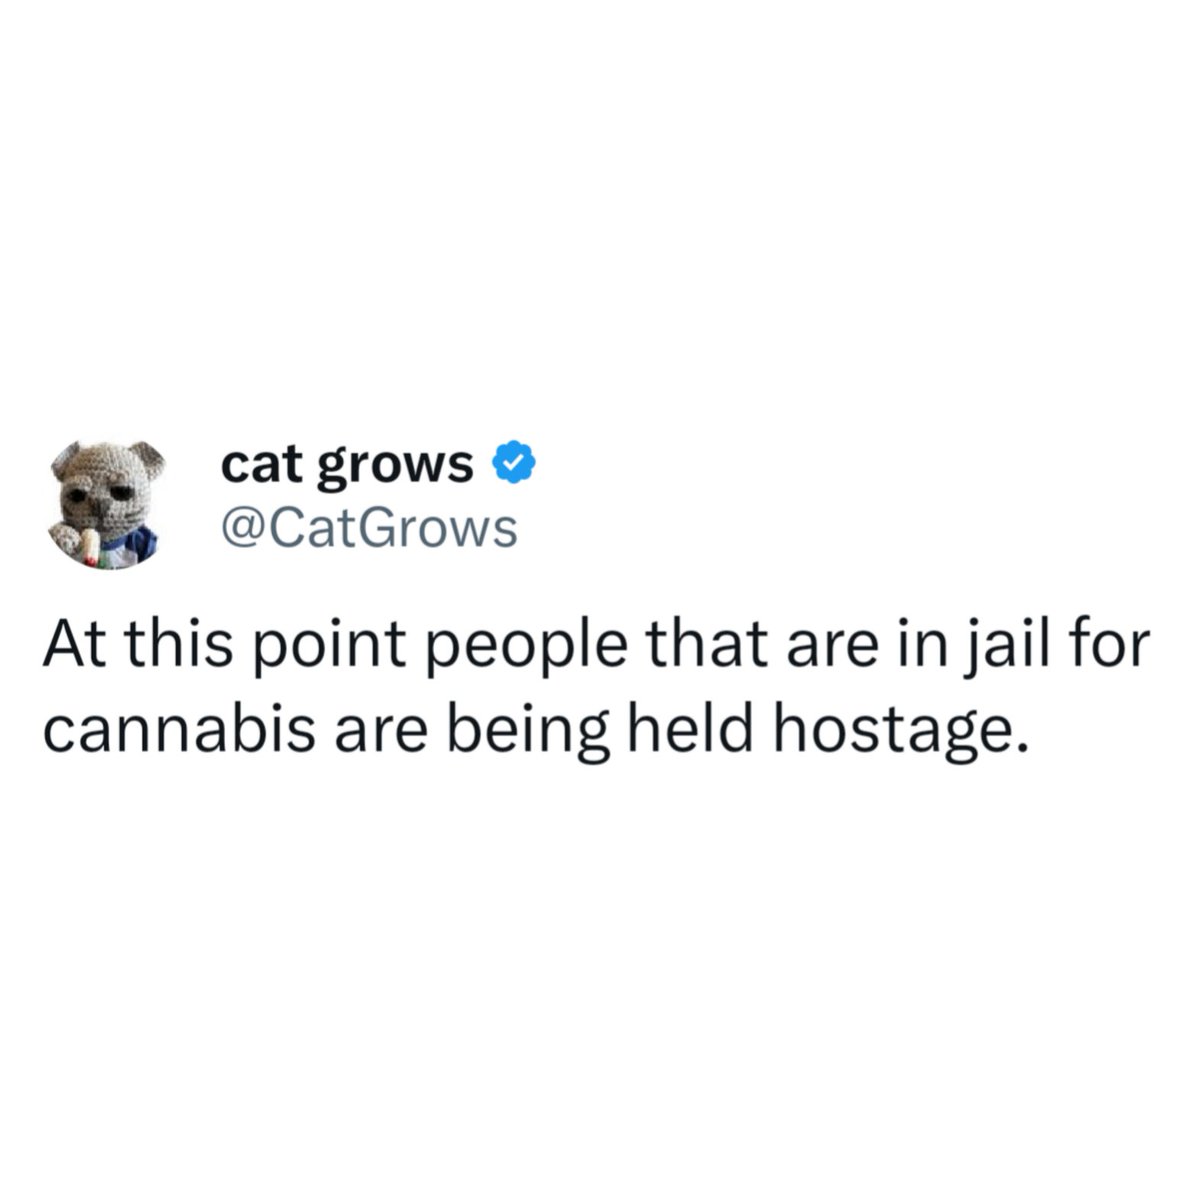 They are hostages #WriteWeed #PuffPUffPass #Weed #IAmGDC